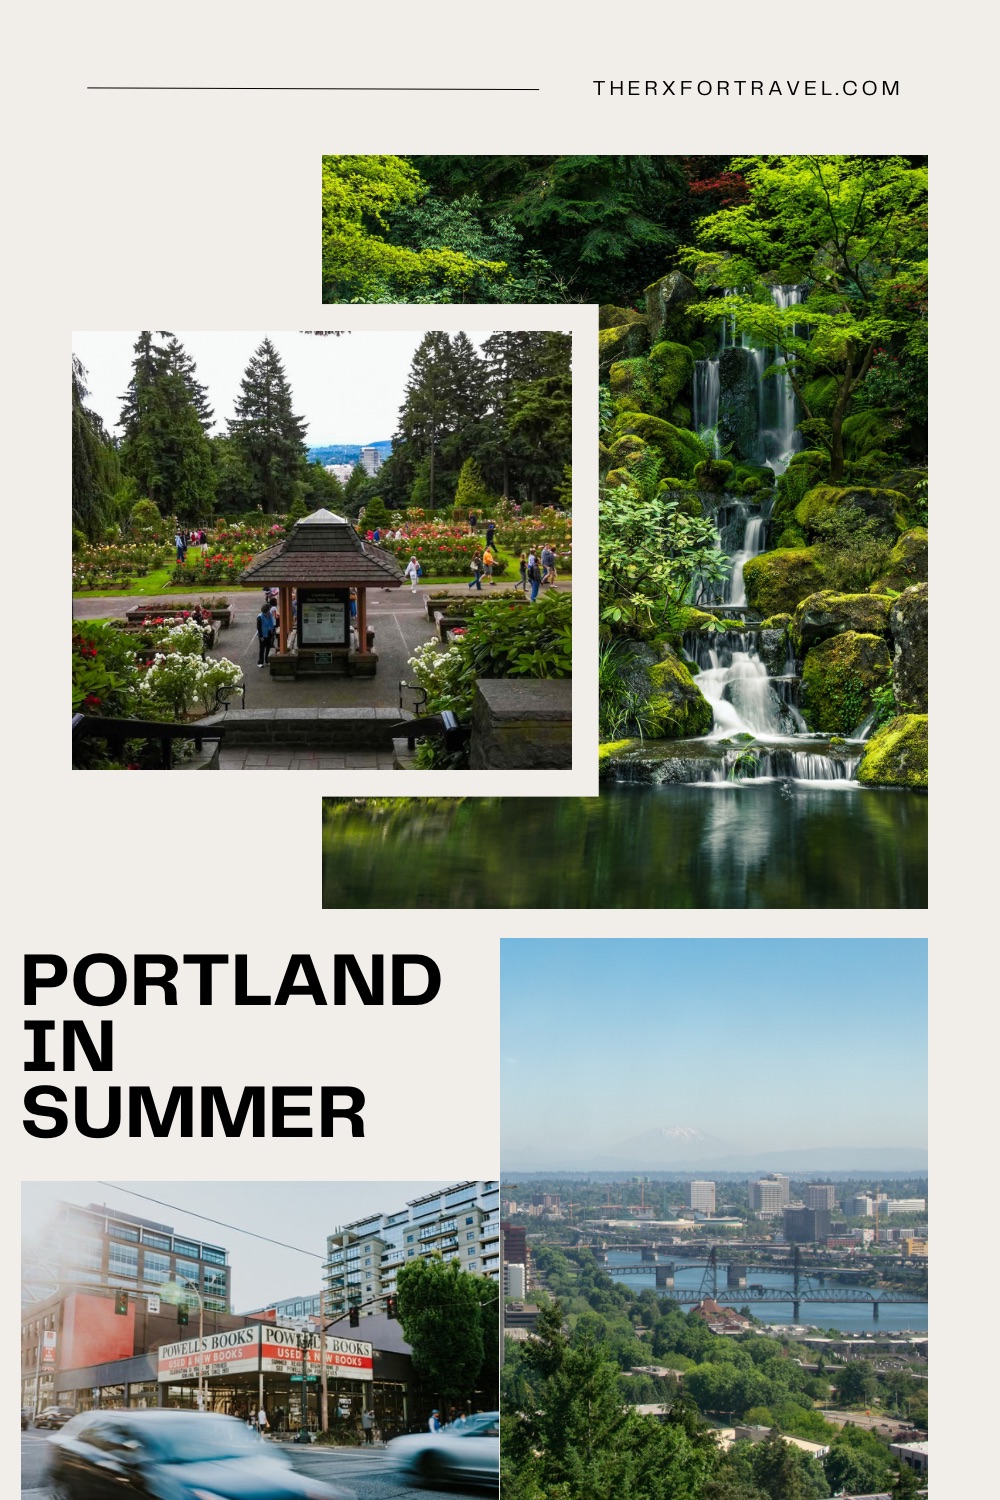 Are you heading to Portland in the summer? Then we've got a line up of activities, sights, and stops, that you have to make while you are here.